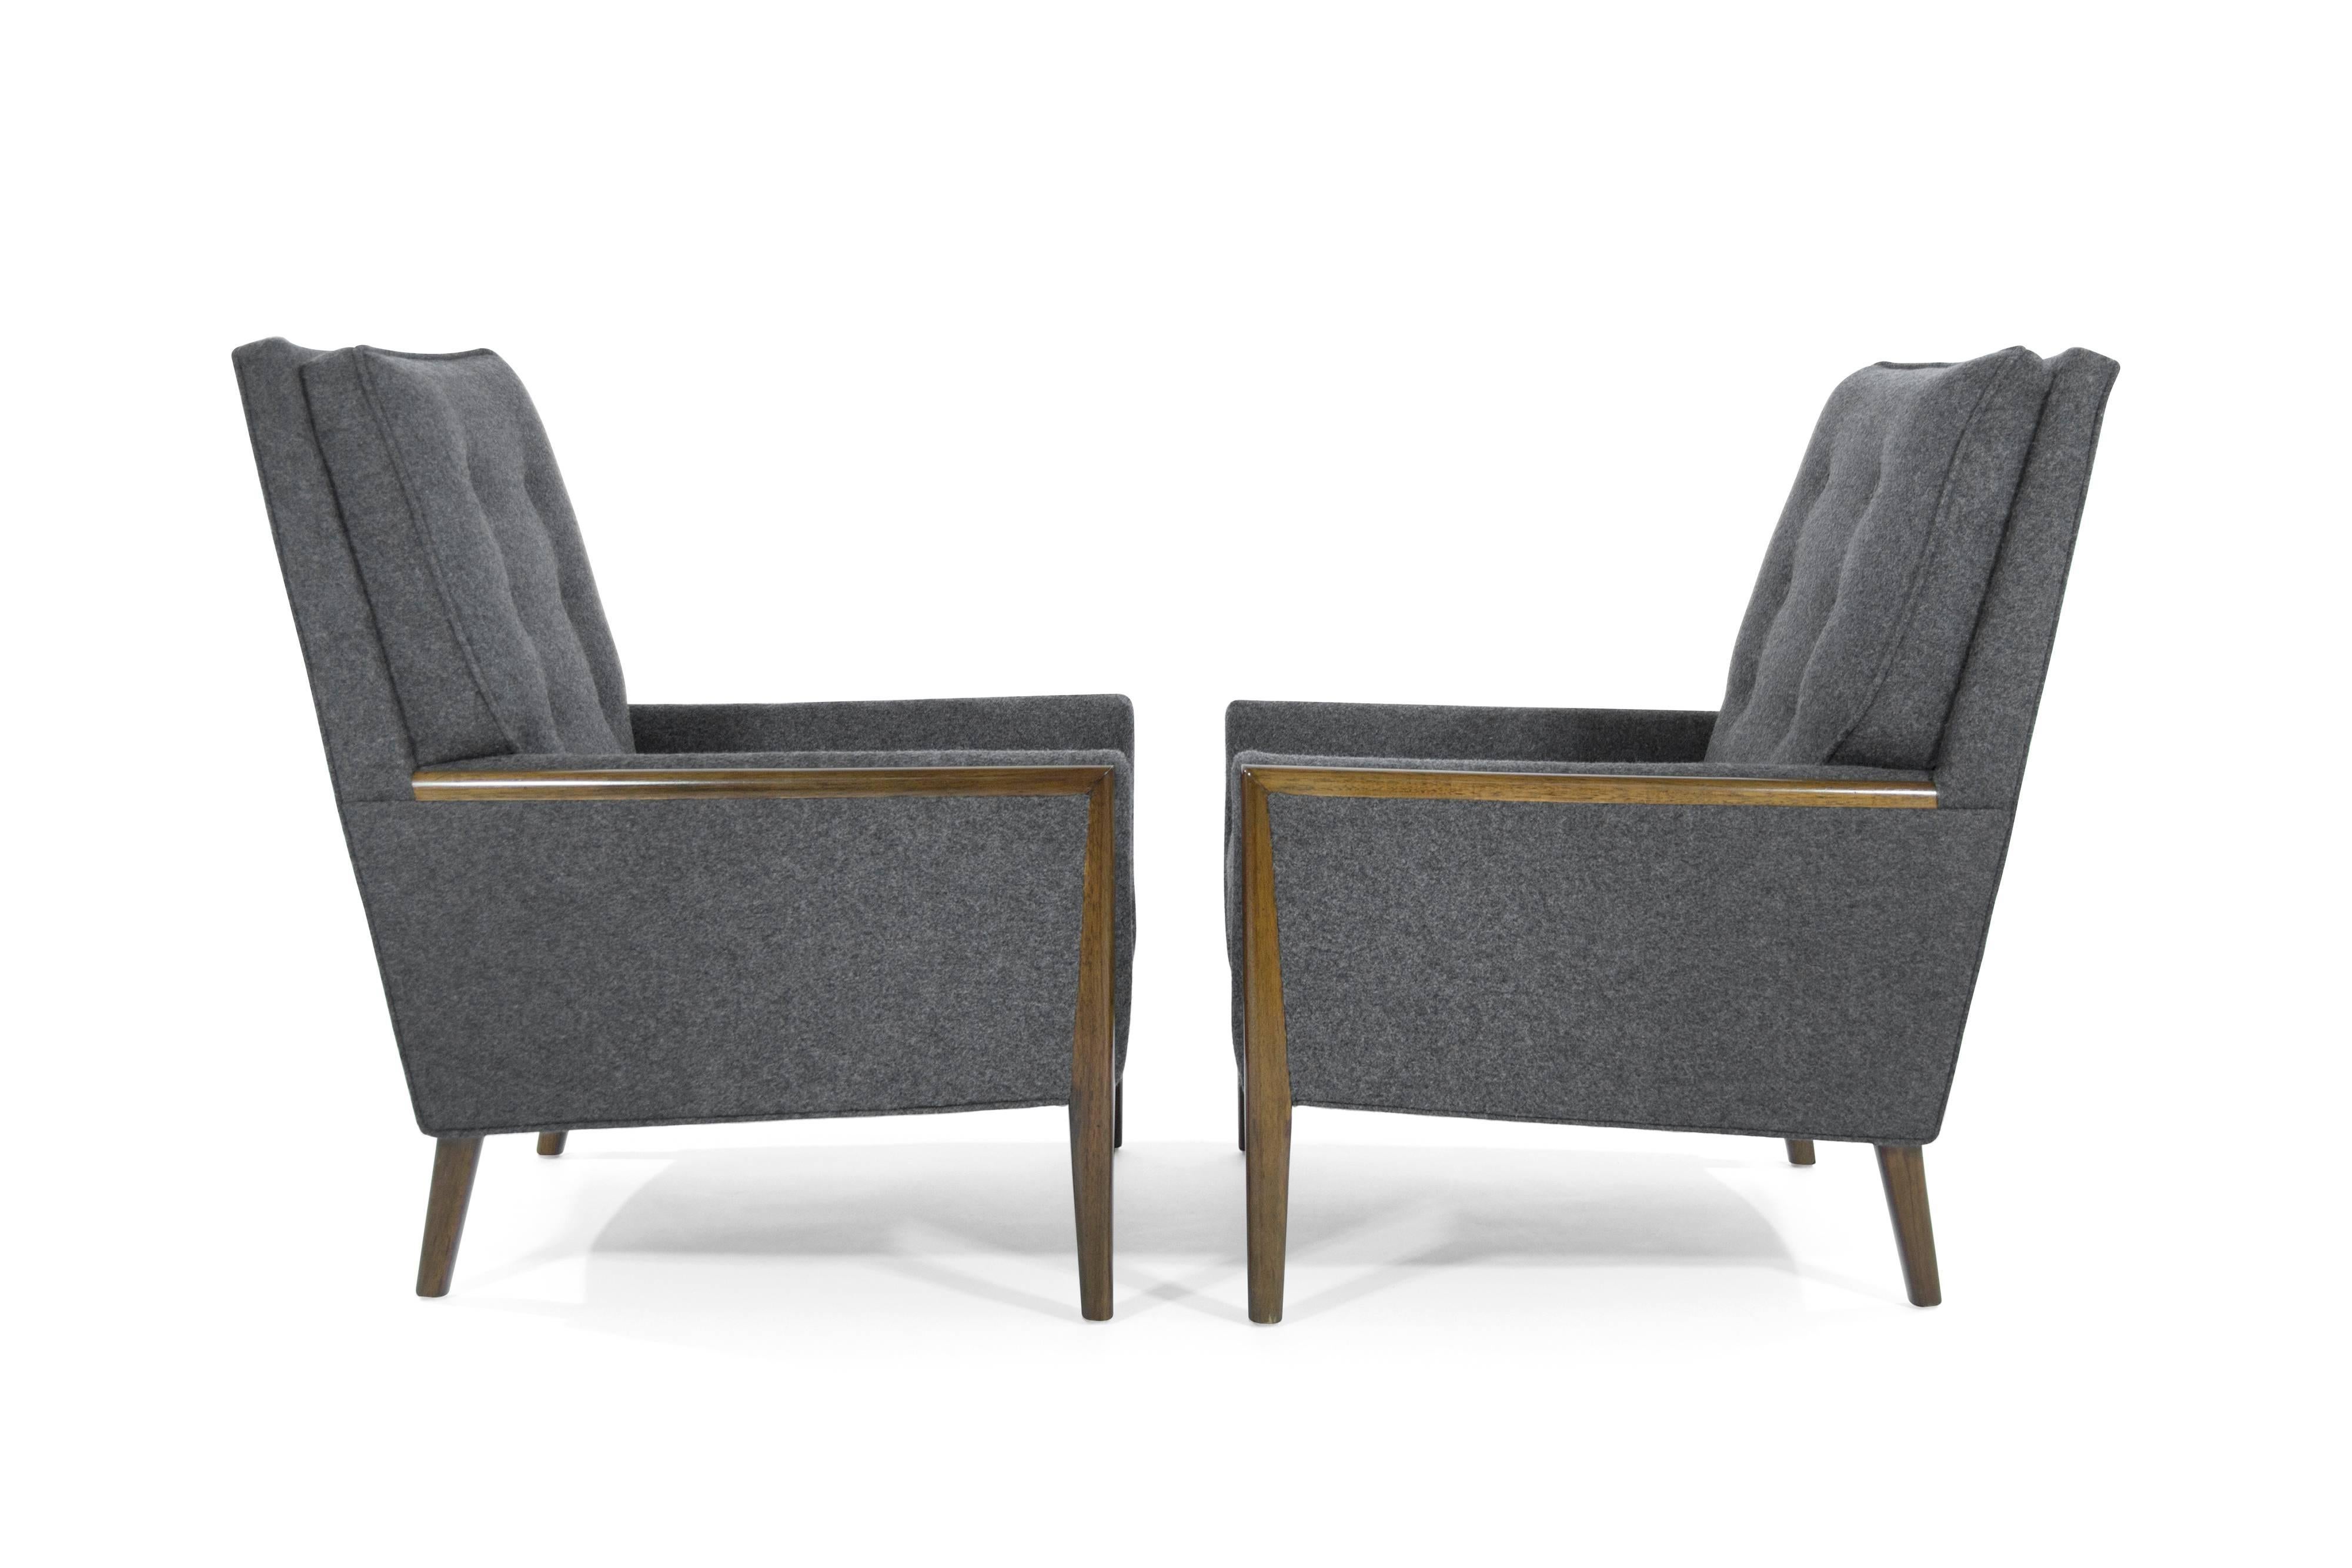 American Mid-Century Modern High Back Lounge Chairs in Grey Wool